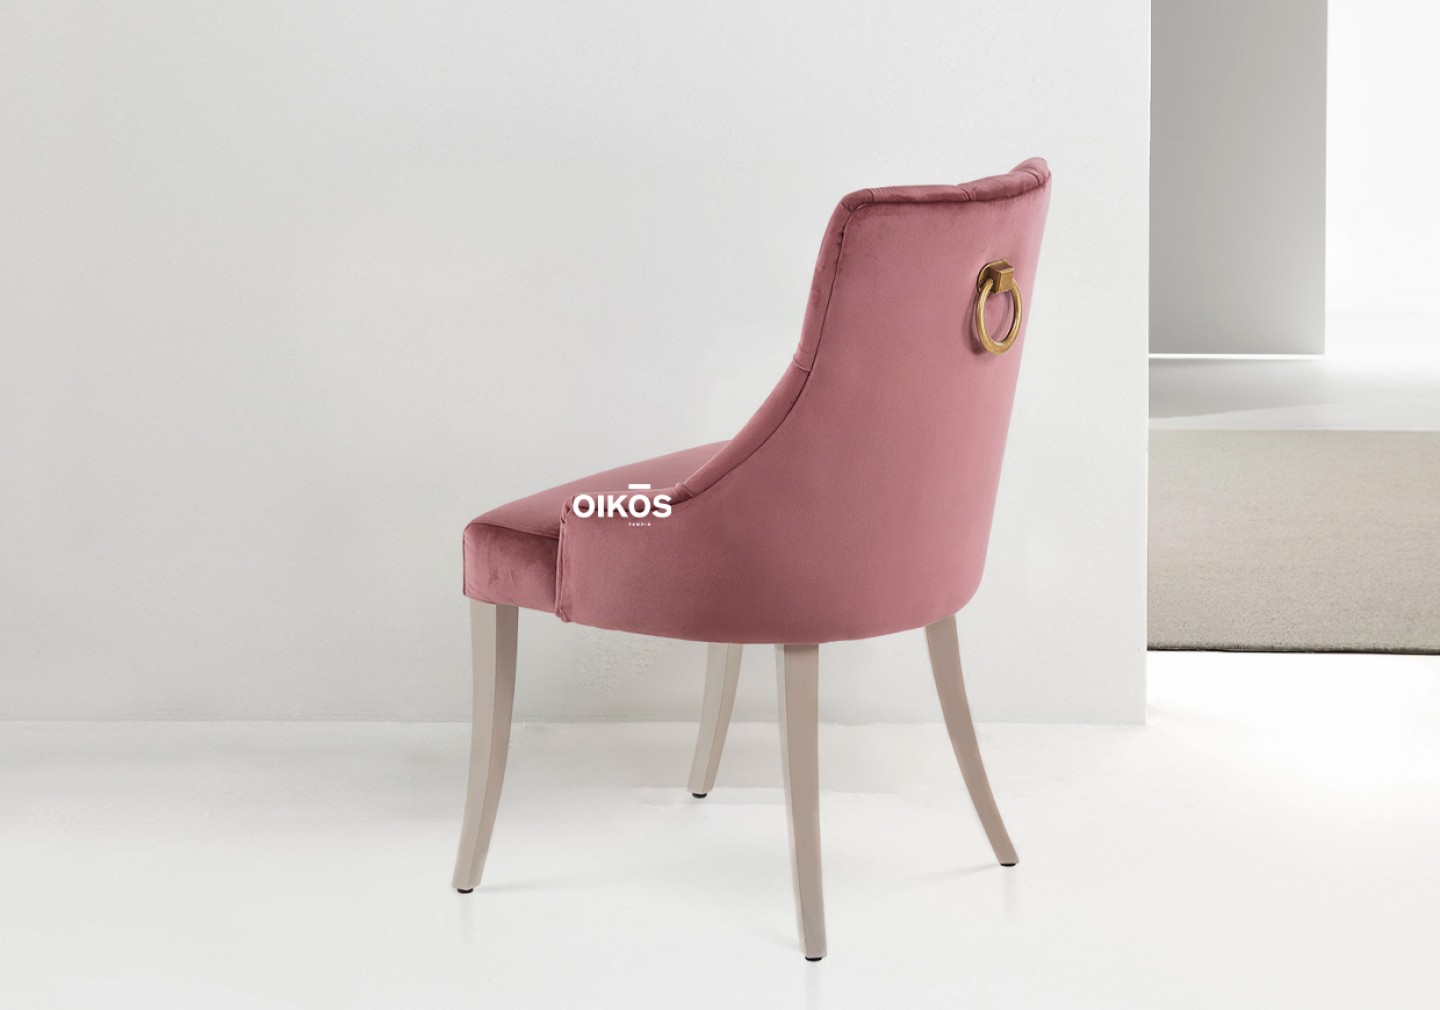 THE ZION DINING CHAIR